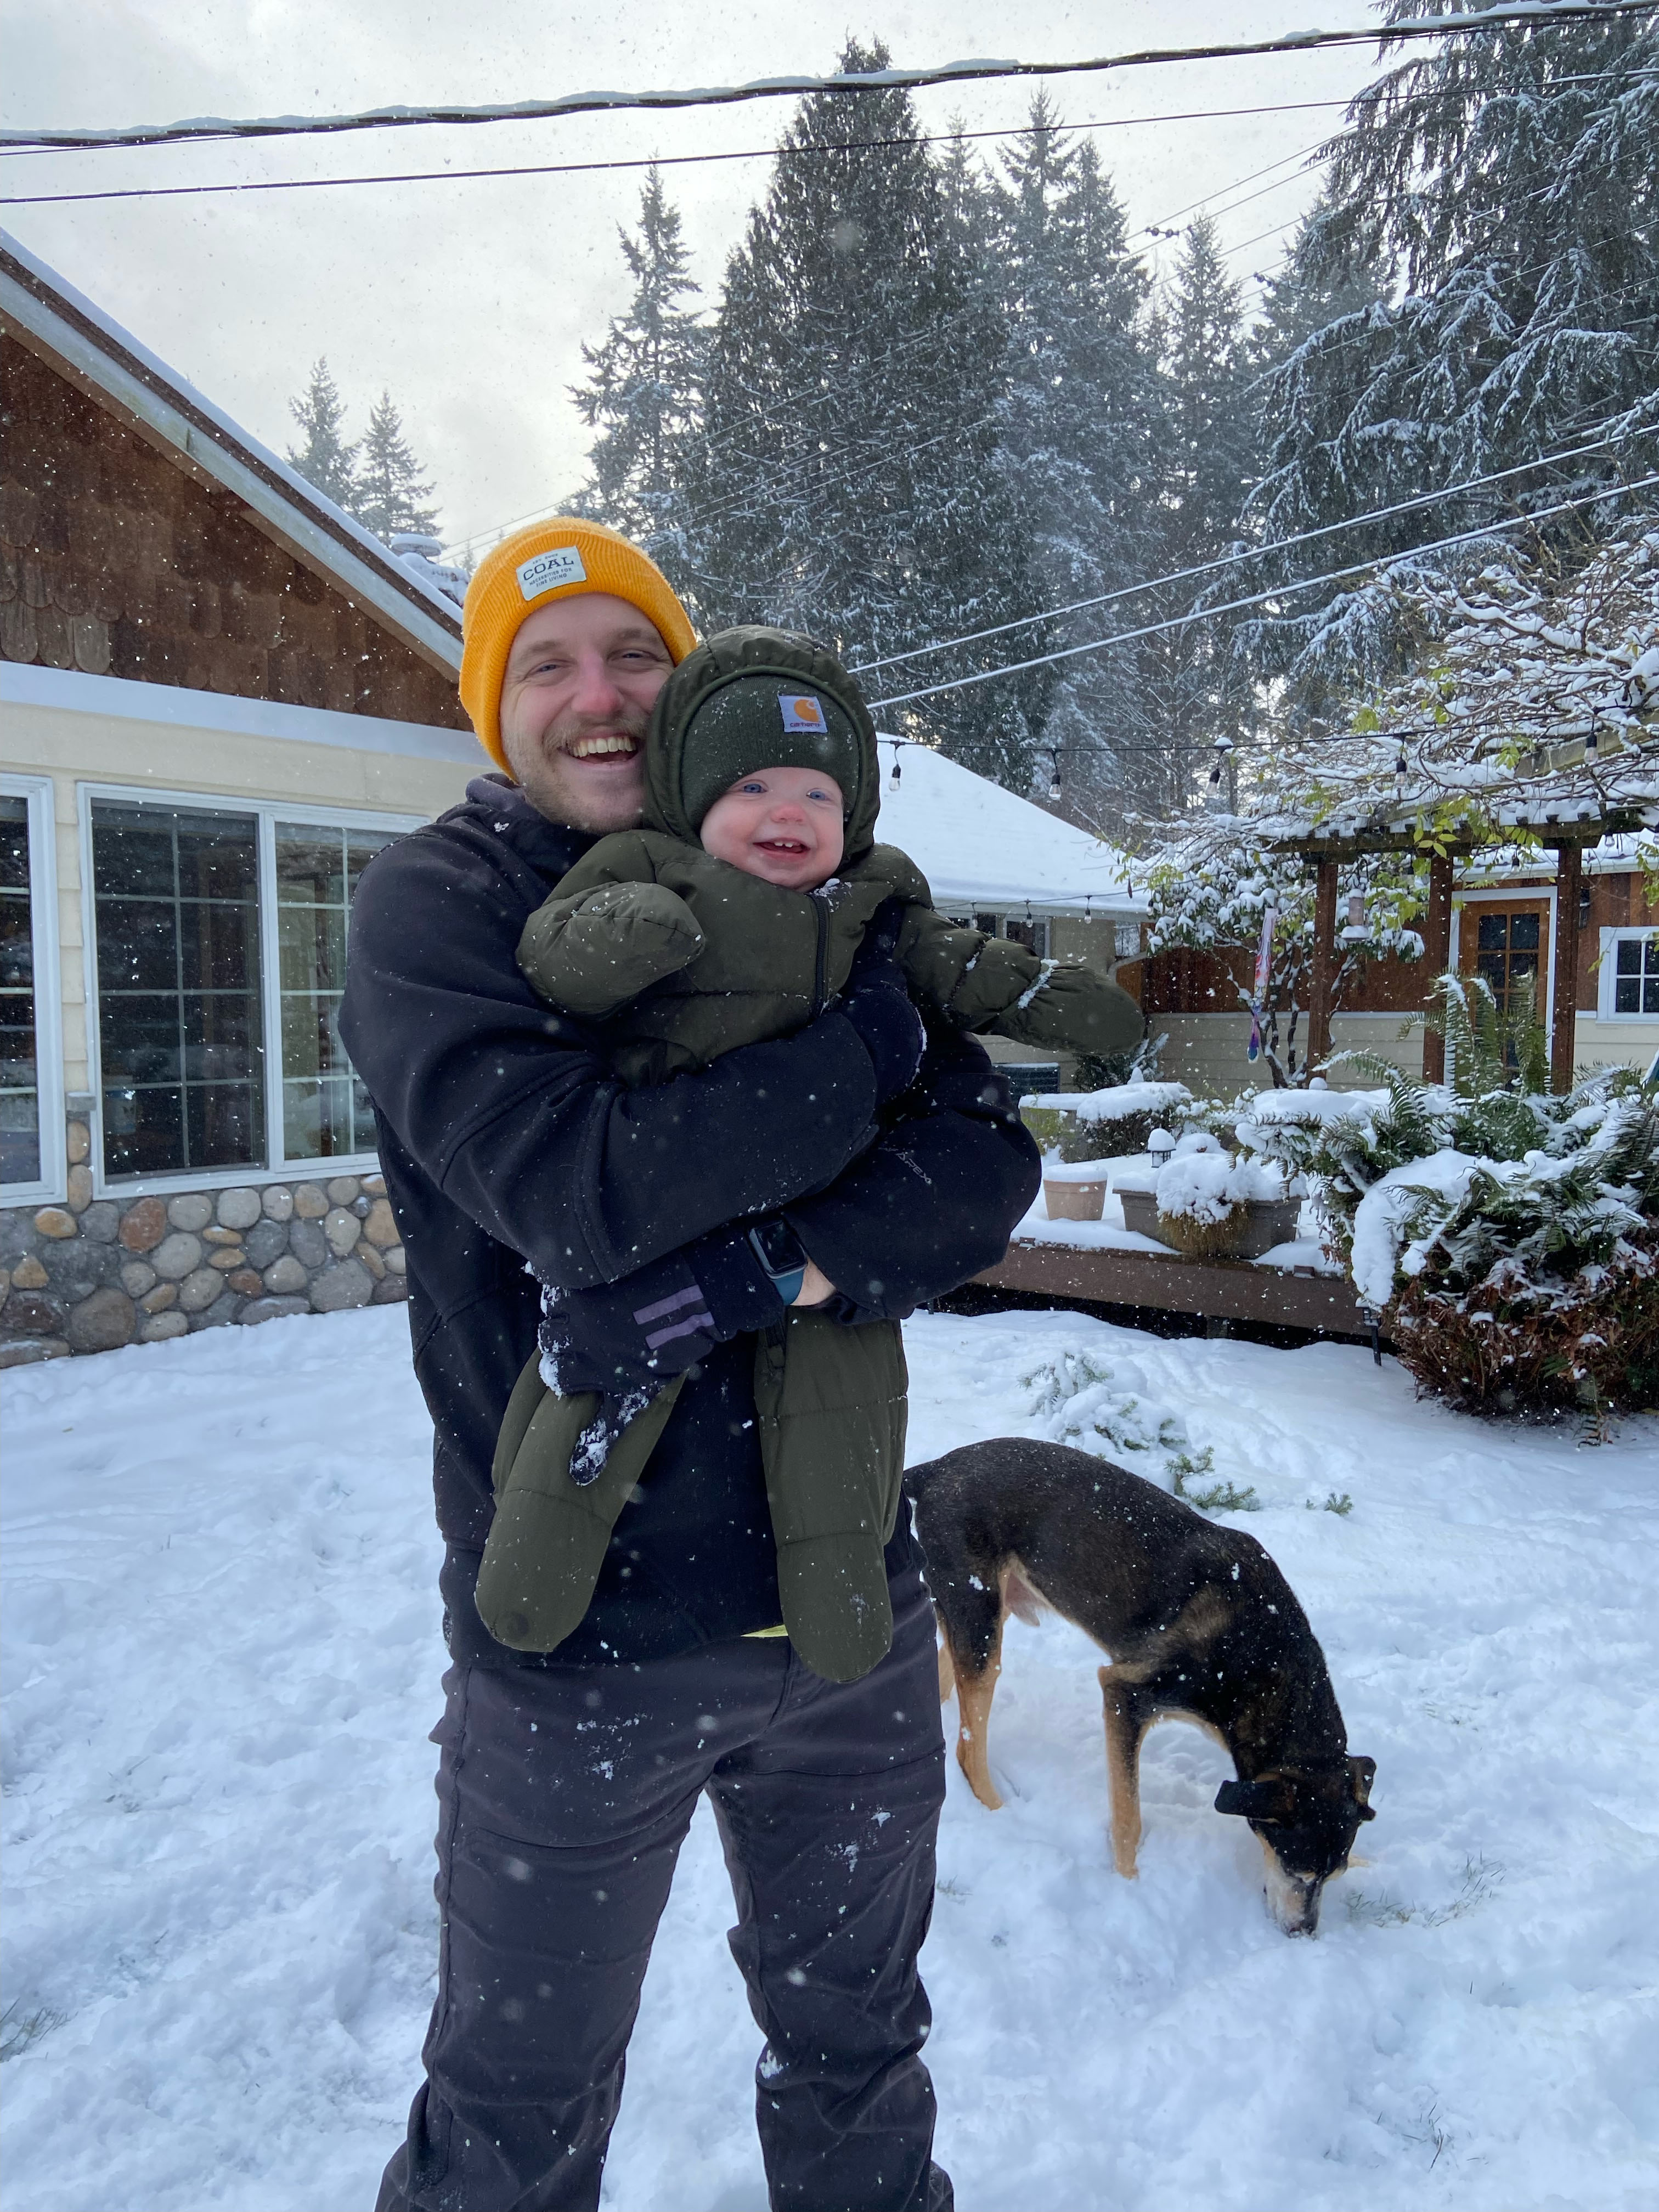 Nic Hartmann holding his child Jolene, outside on a snowy day.